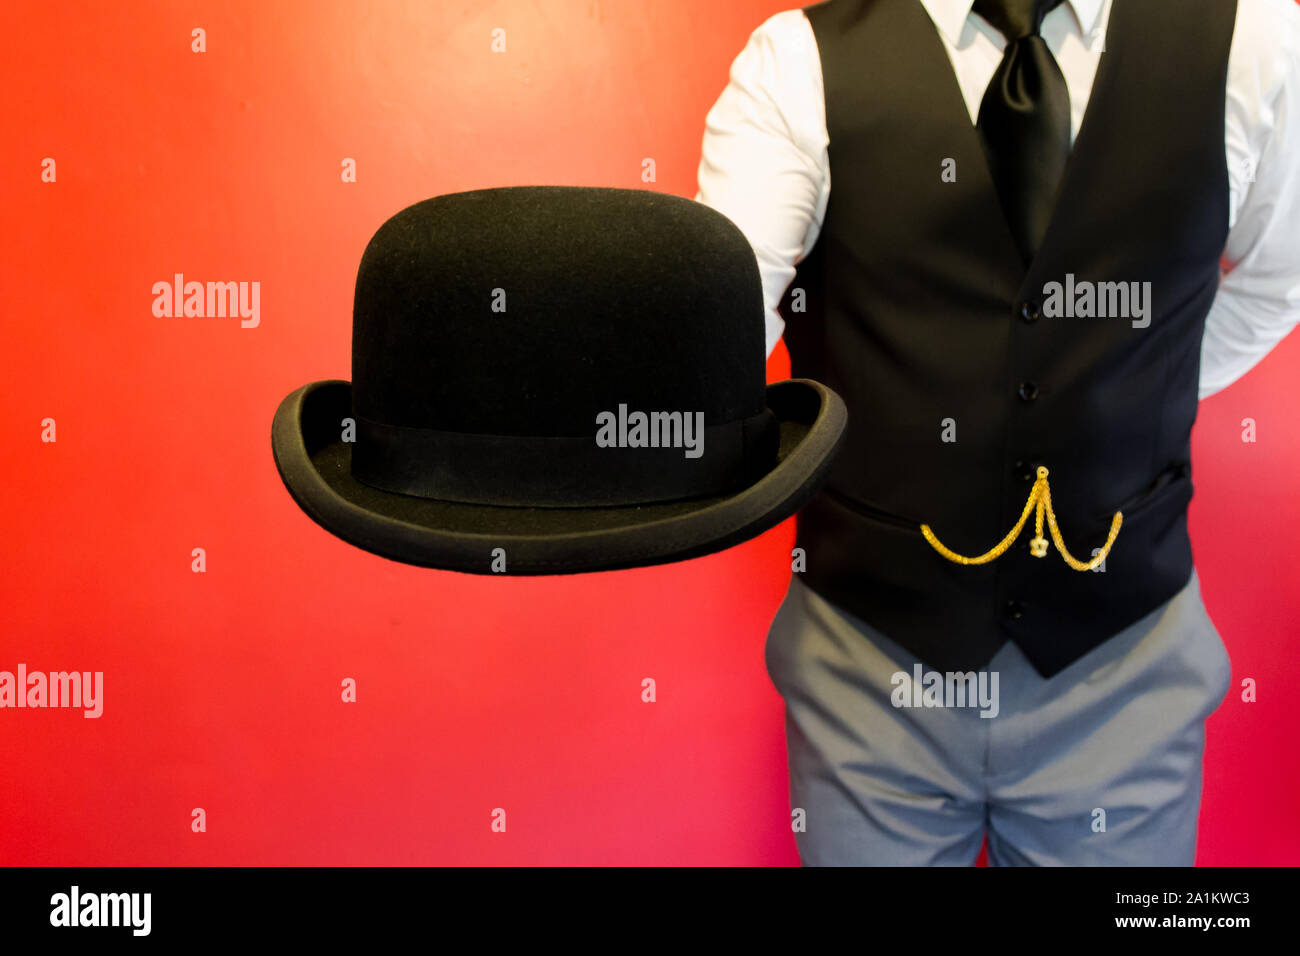 Butler Presenting a Bowler Hat. Concept of Service Industry and Professional Hospitality and Courtesy. Stock Photo